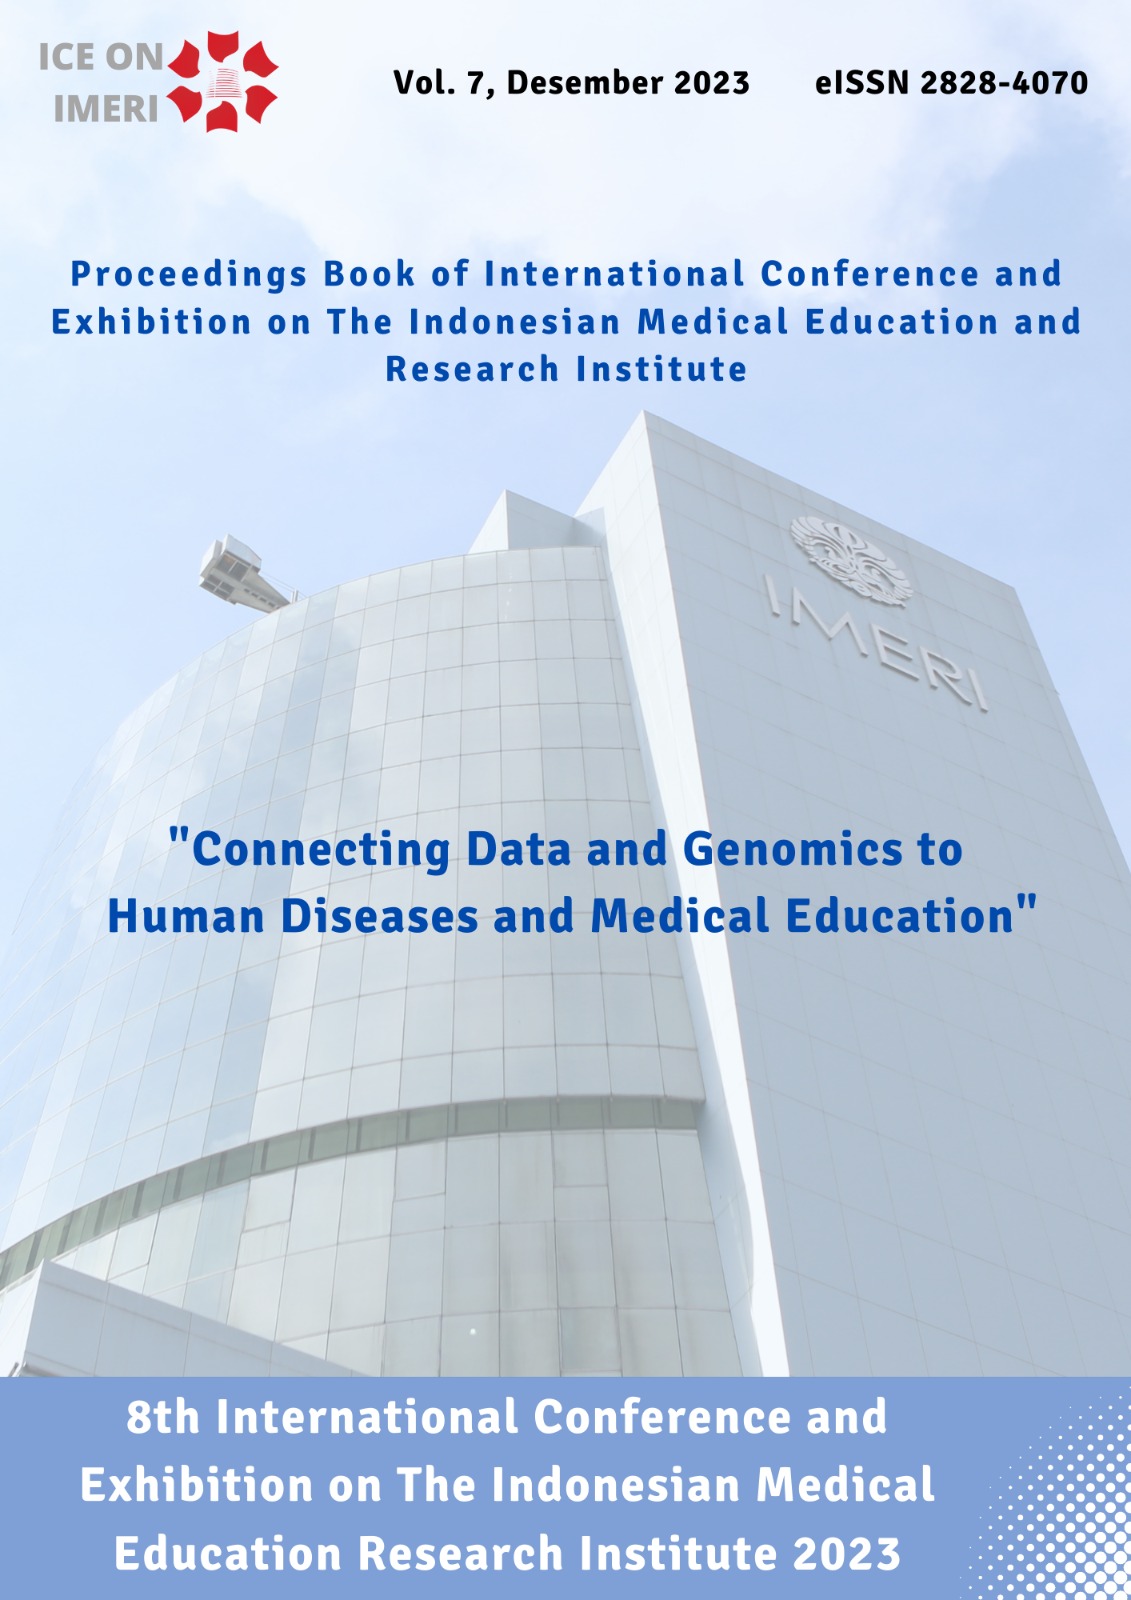 					View Vol. 7 No. - (2023): Proceedings Book of International Conference and Exhibition on The Indonesian Medical Education and Research Institute
				